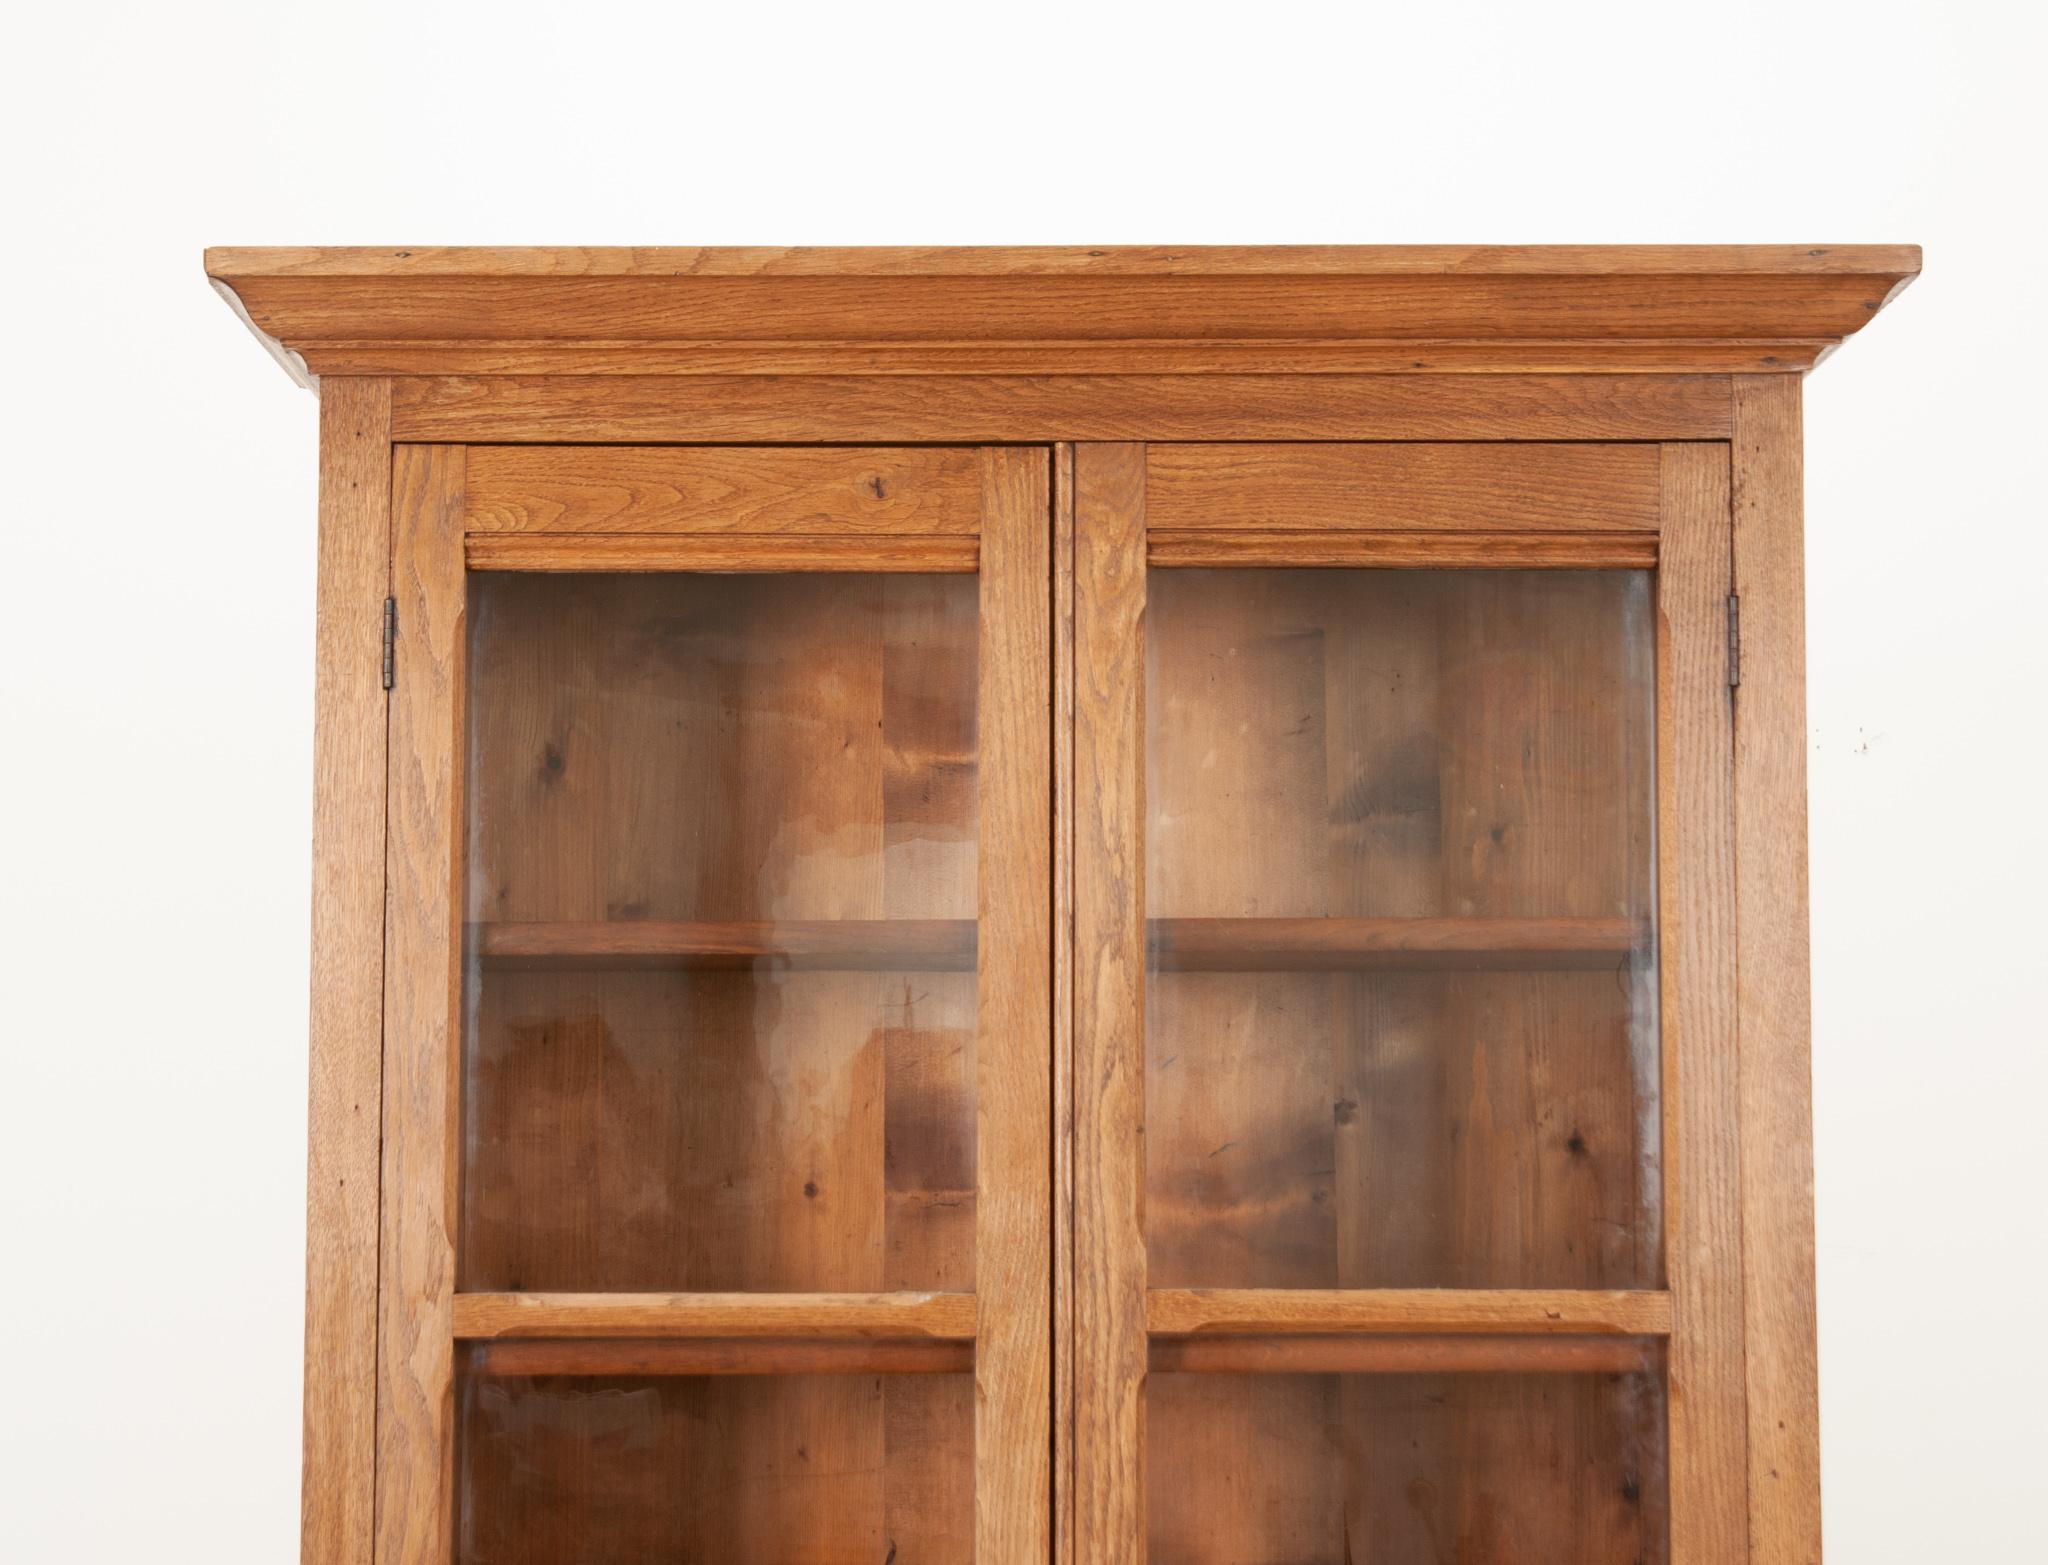 Hand-Crafted 19th Century Oak Bookcase